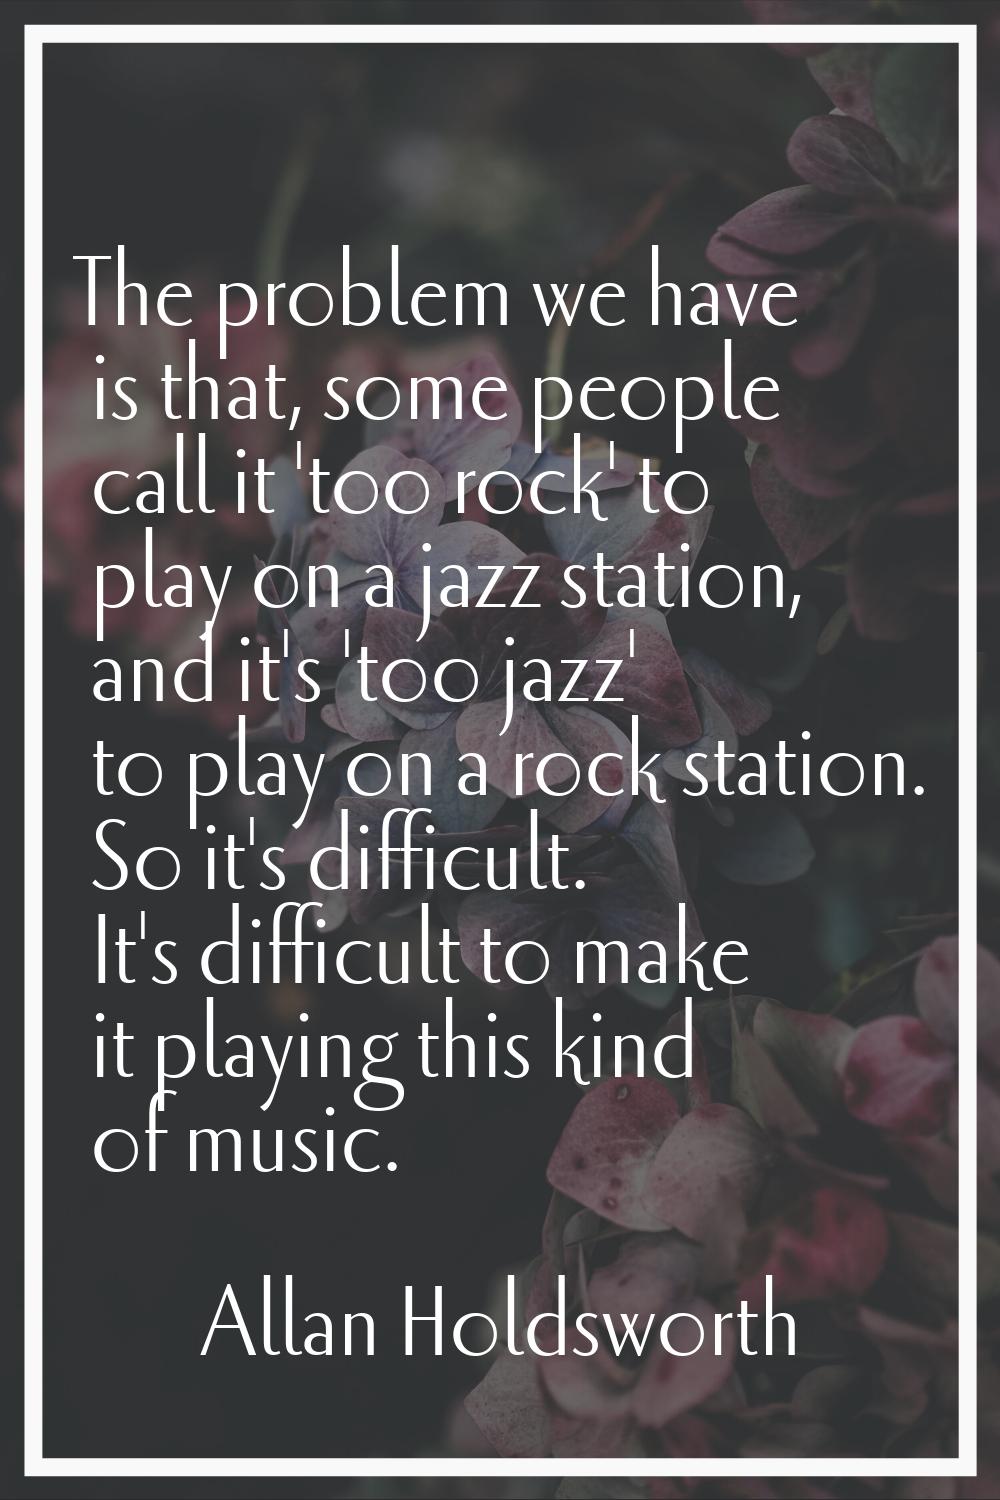 The problem we have is that, some people call it 'too rock' to play on a jazz station, and it's 'to